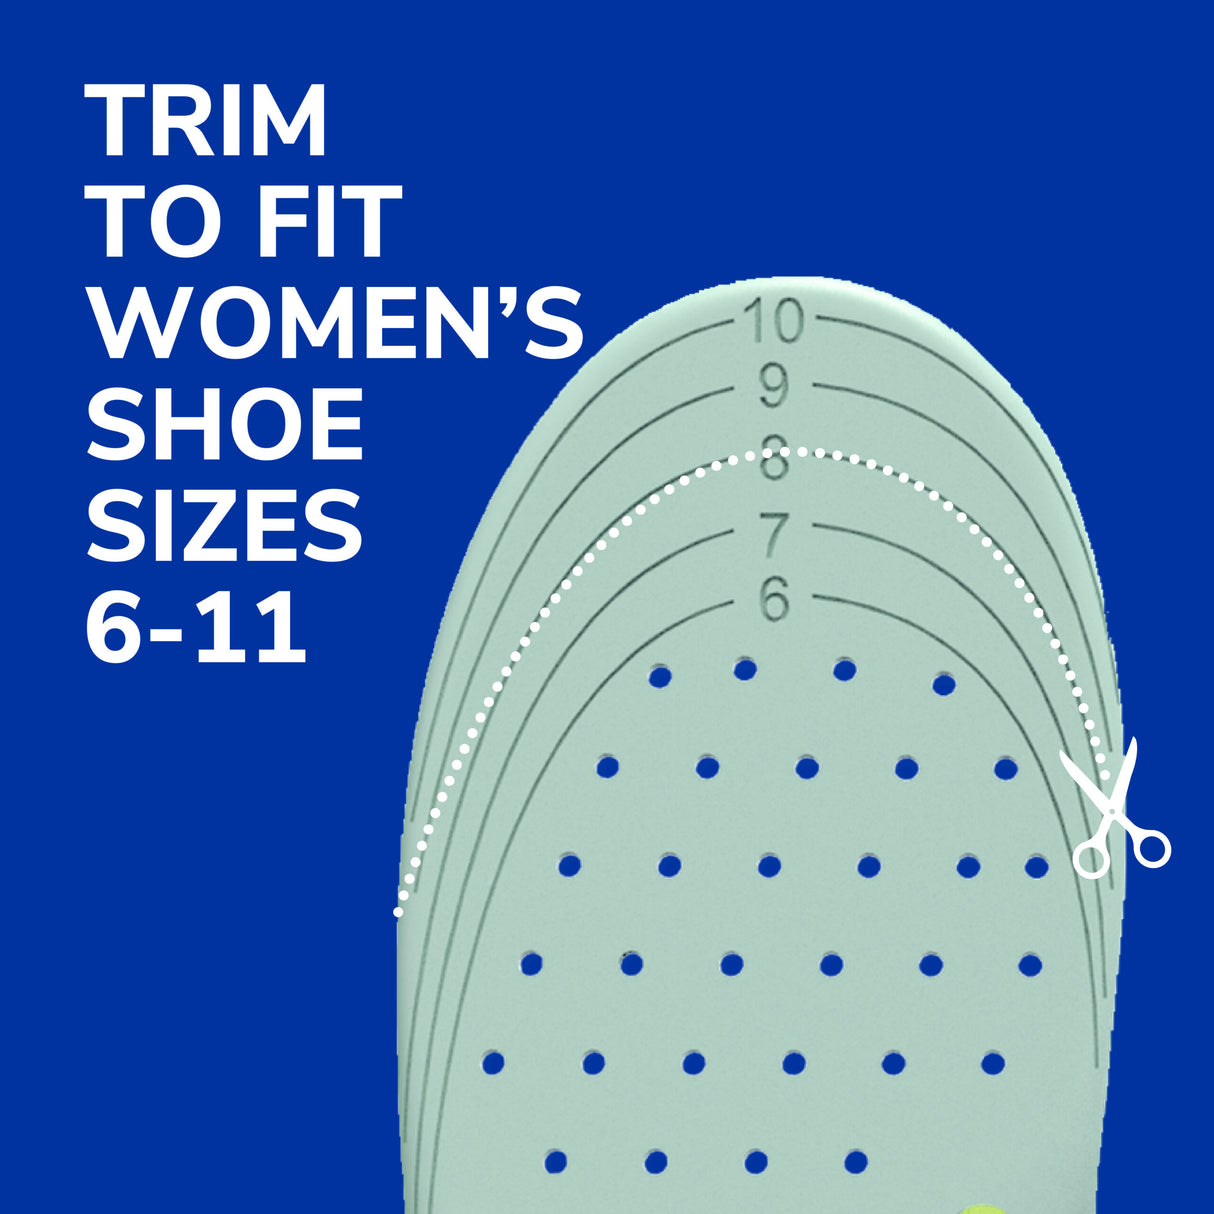 image of trim to fit womens shoe sizes 6-11